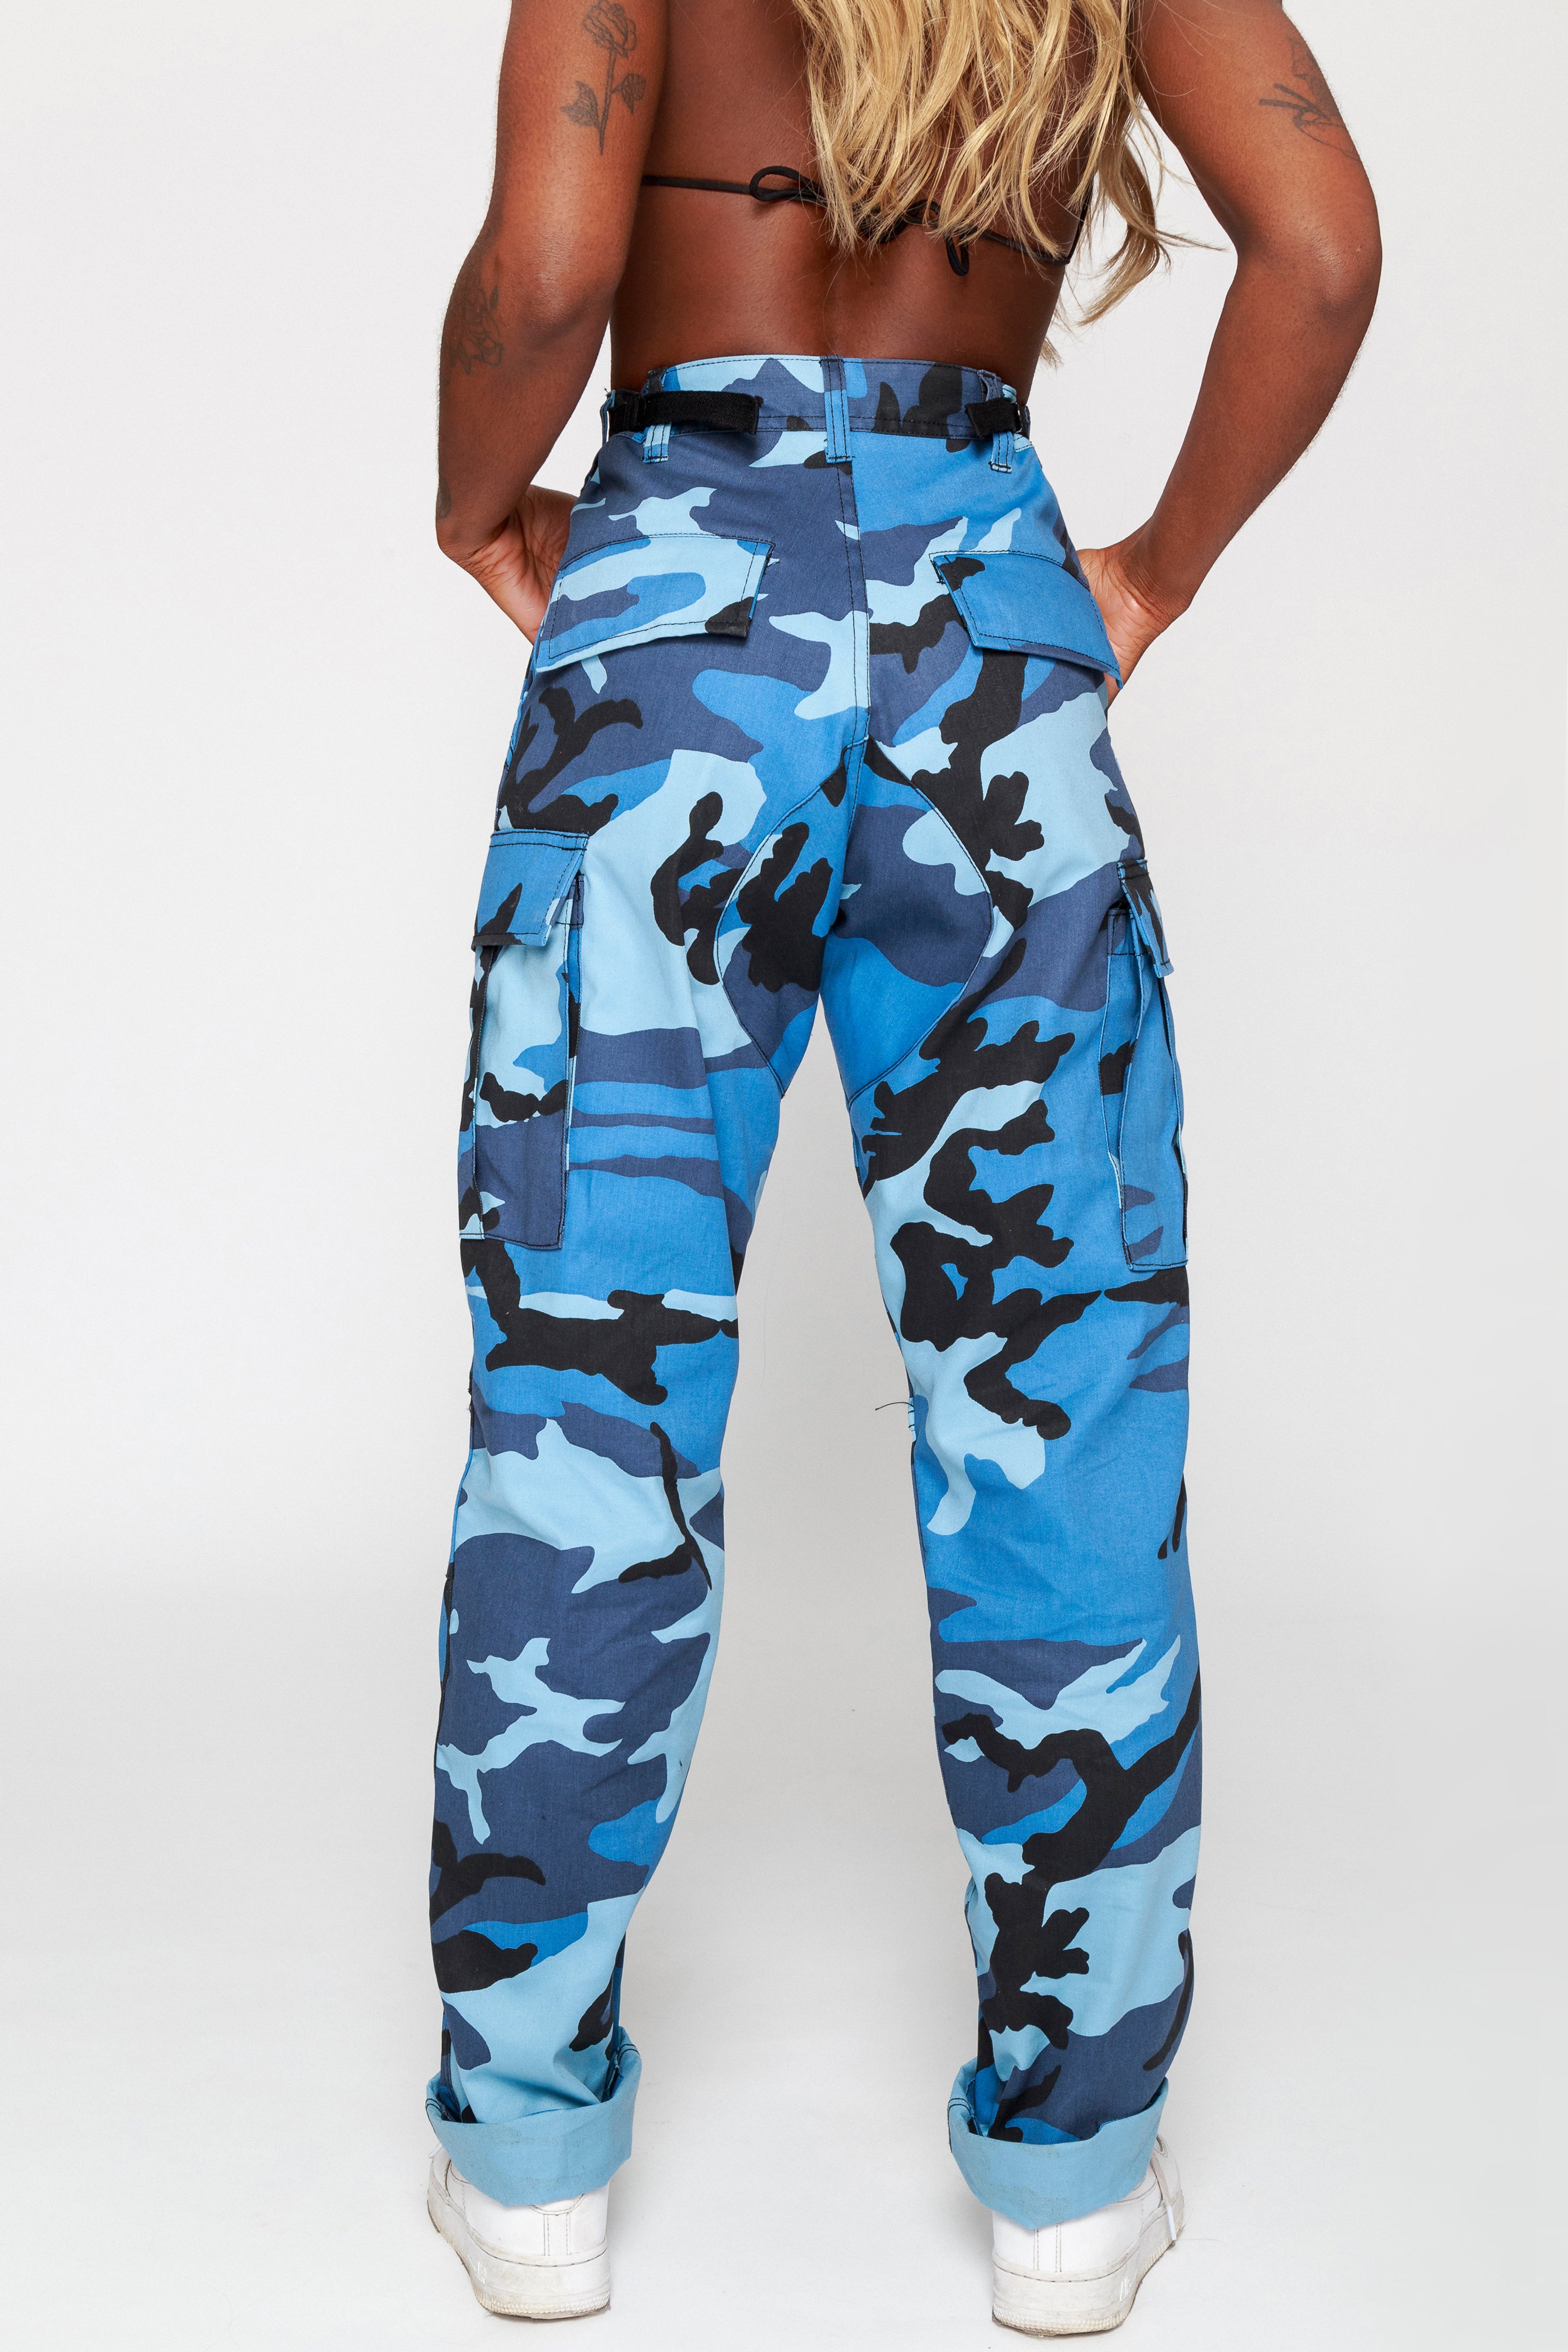 Messy Marines Navy Blue Camo Hoppers  Unisex Pants For Men And Women   Bombay Trooper